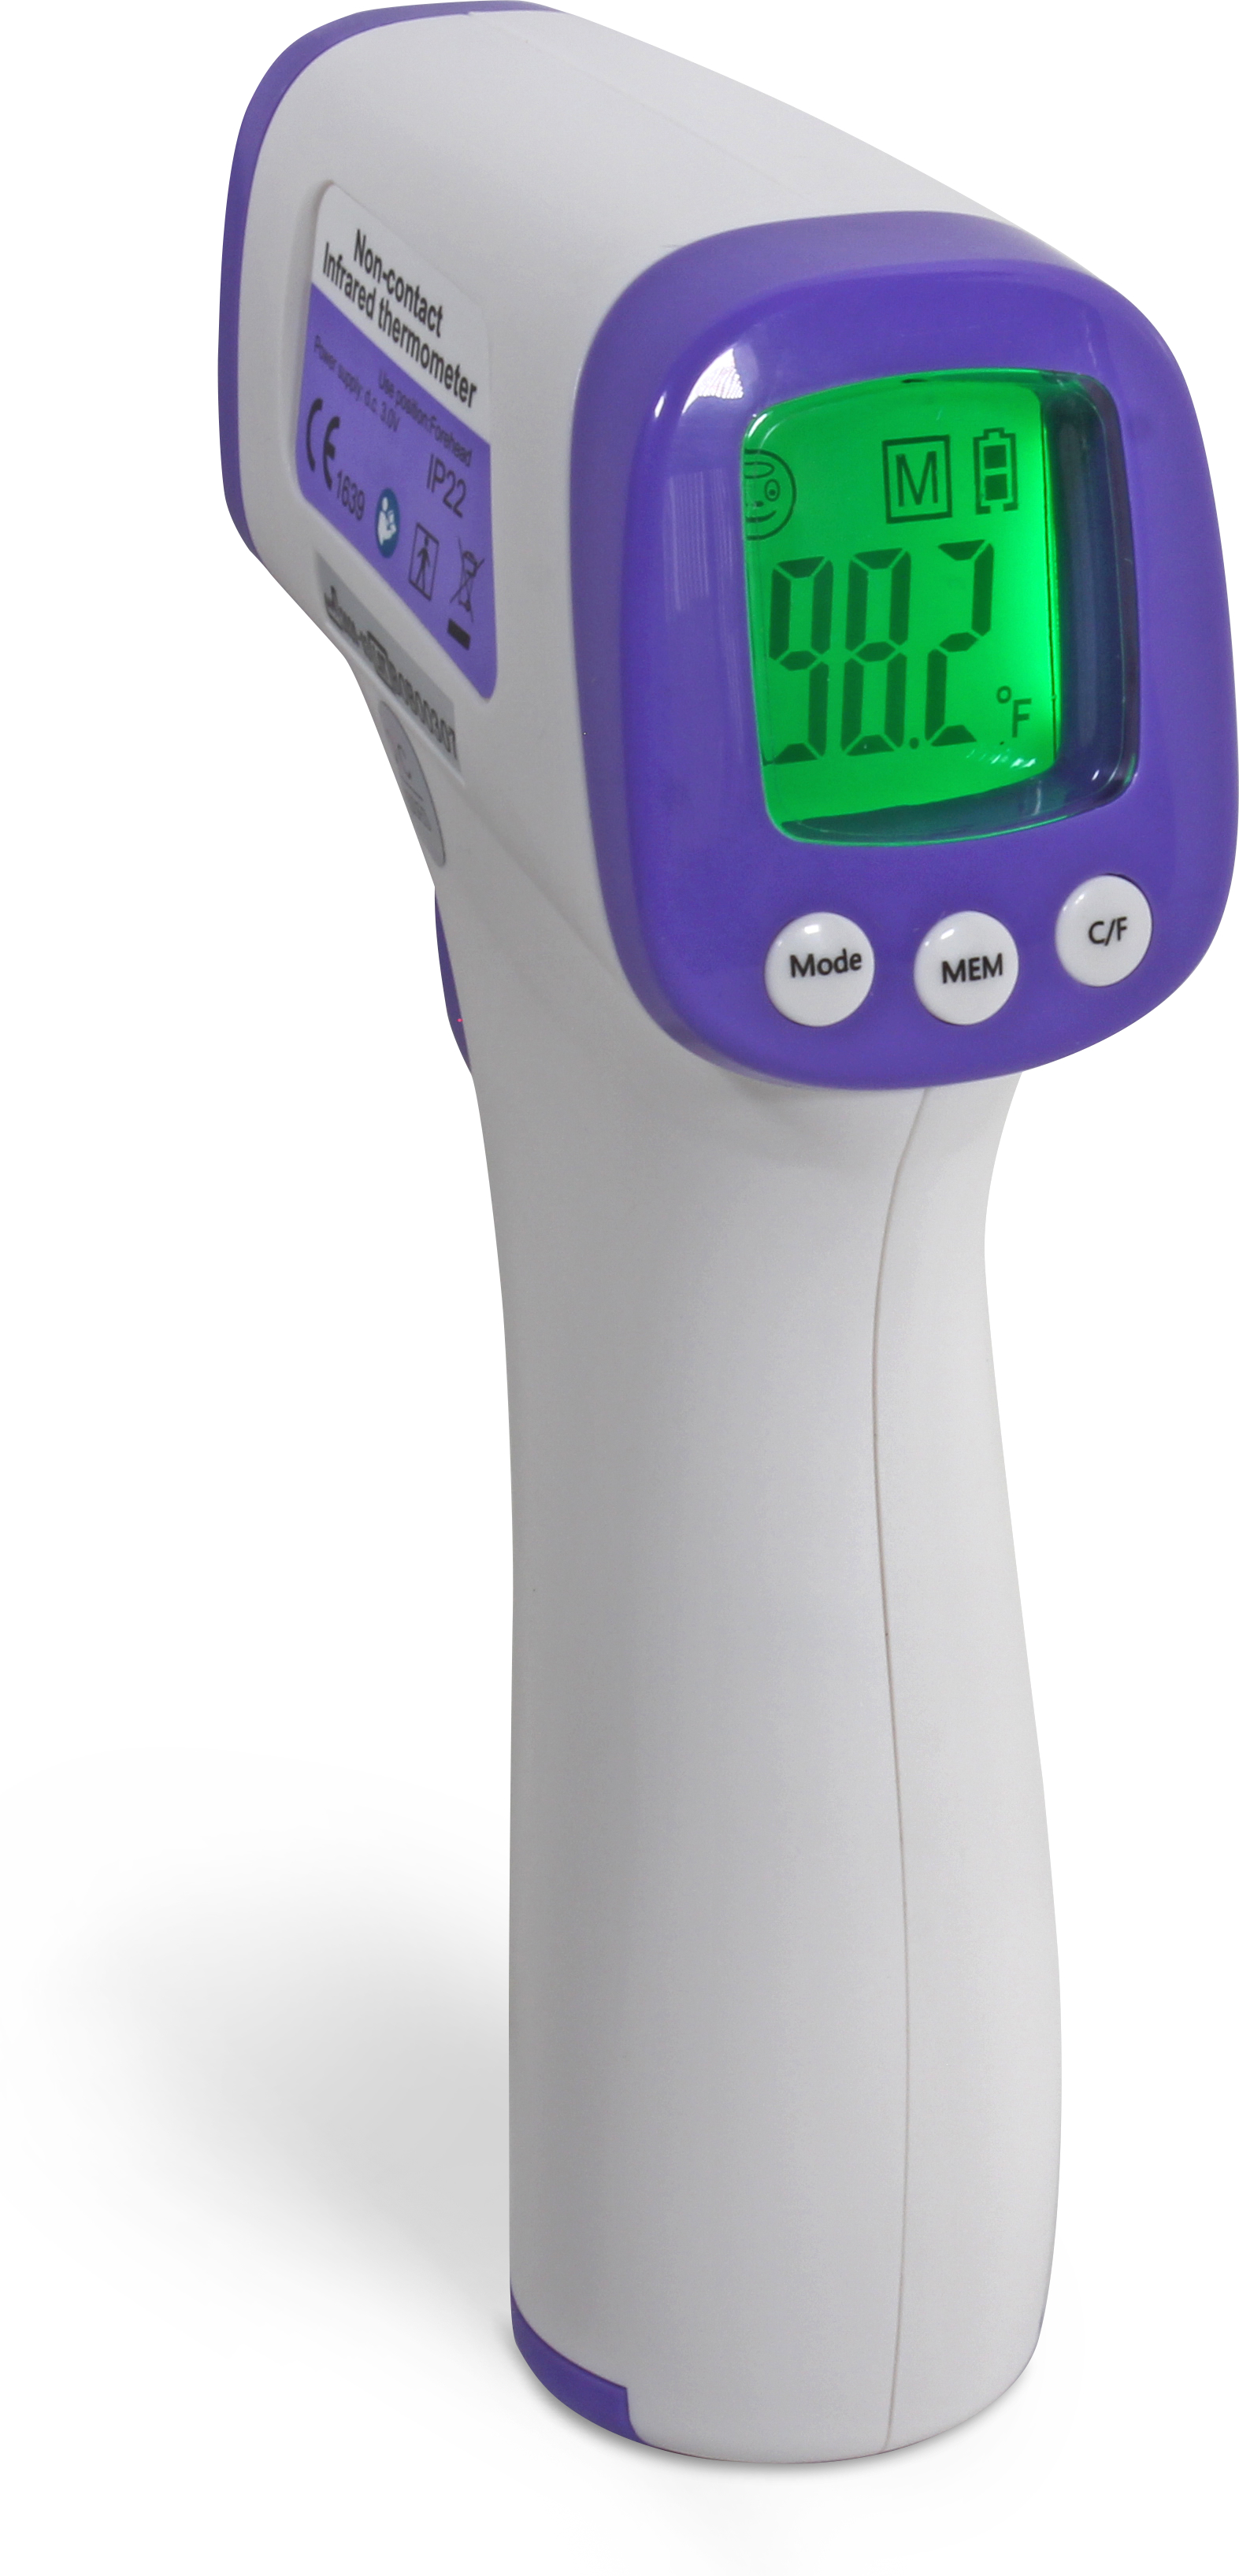 No-contact thermometer helps keep staff and customers safe